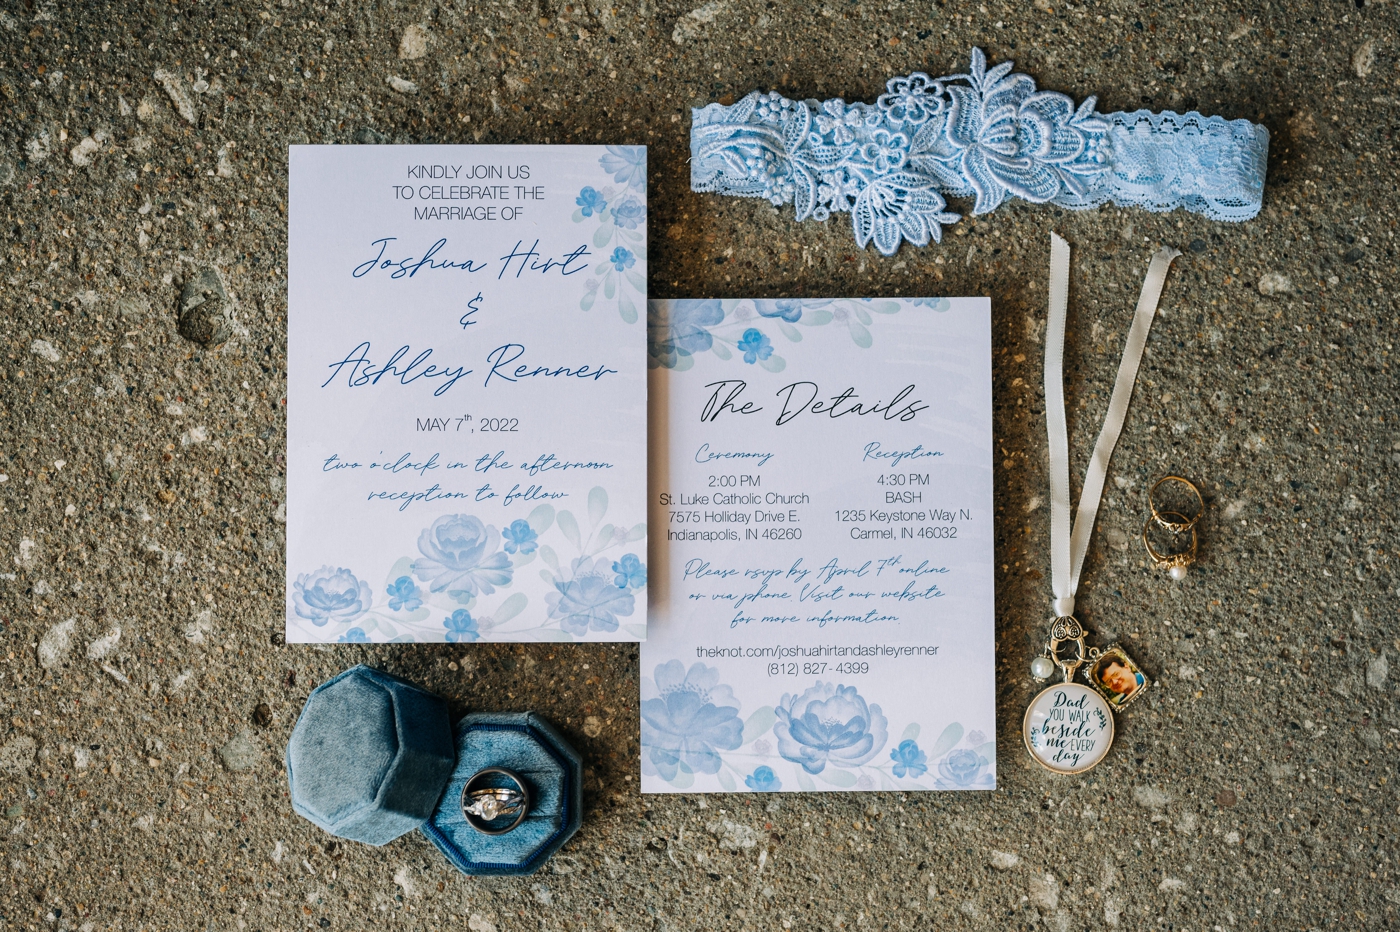 Blue and white wedding day details